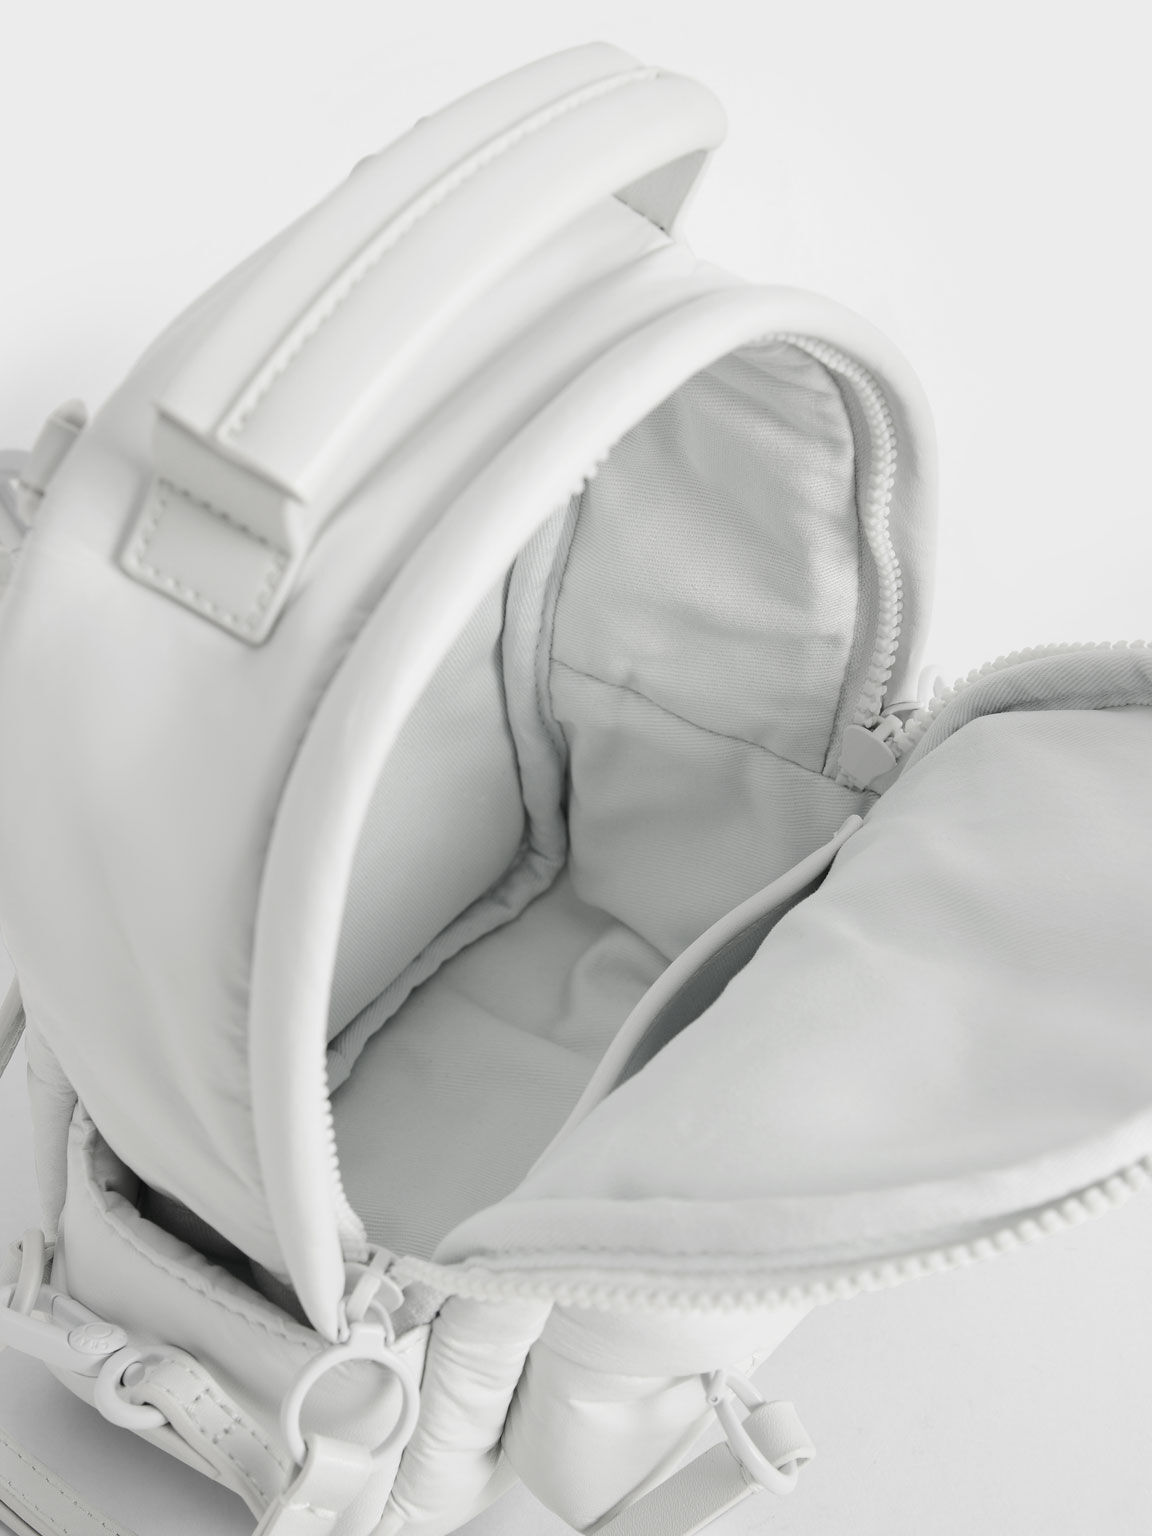 Tas Backpack Puffy, White, hi-res